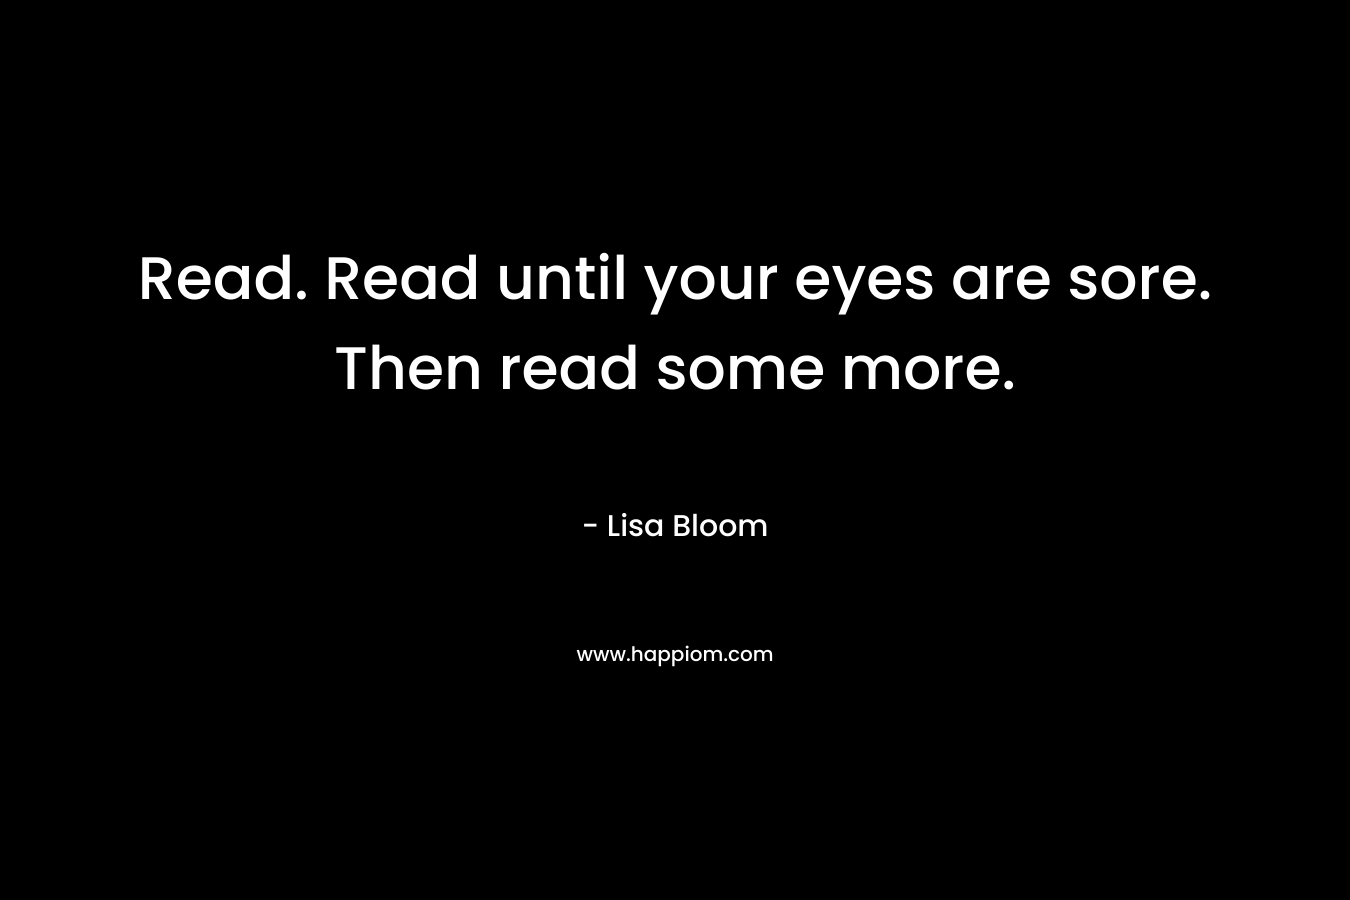 Read. Read until your eyes are sore. Then read some more. – Lisa Bloom